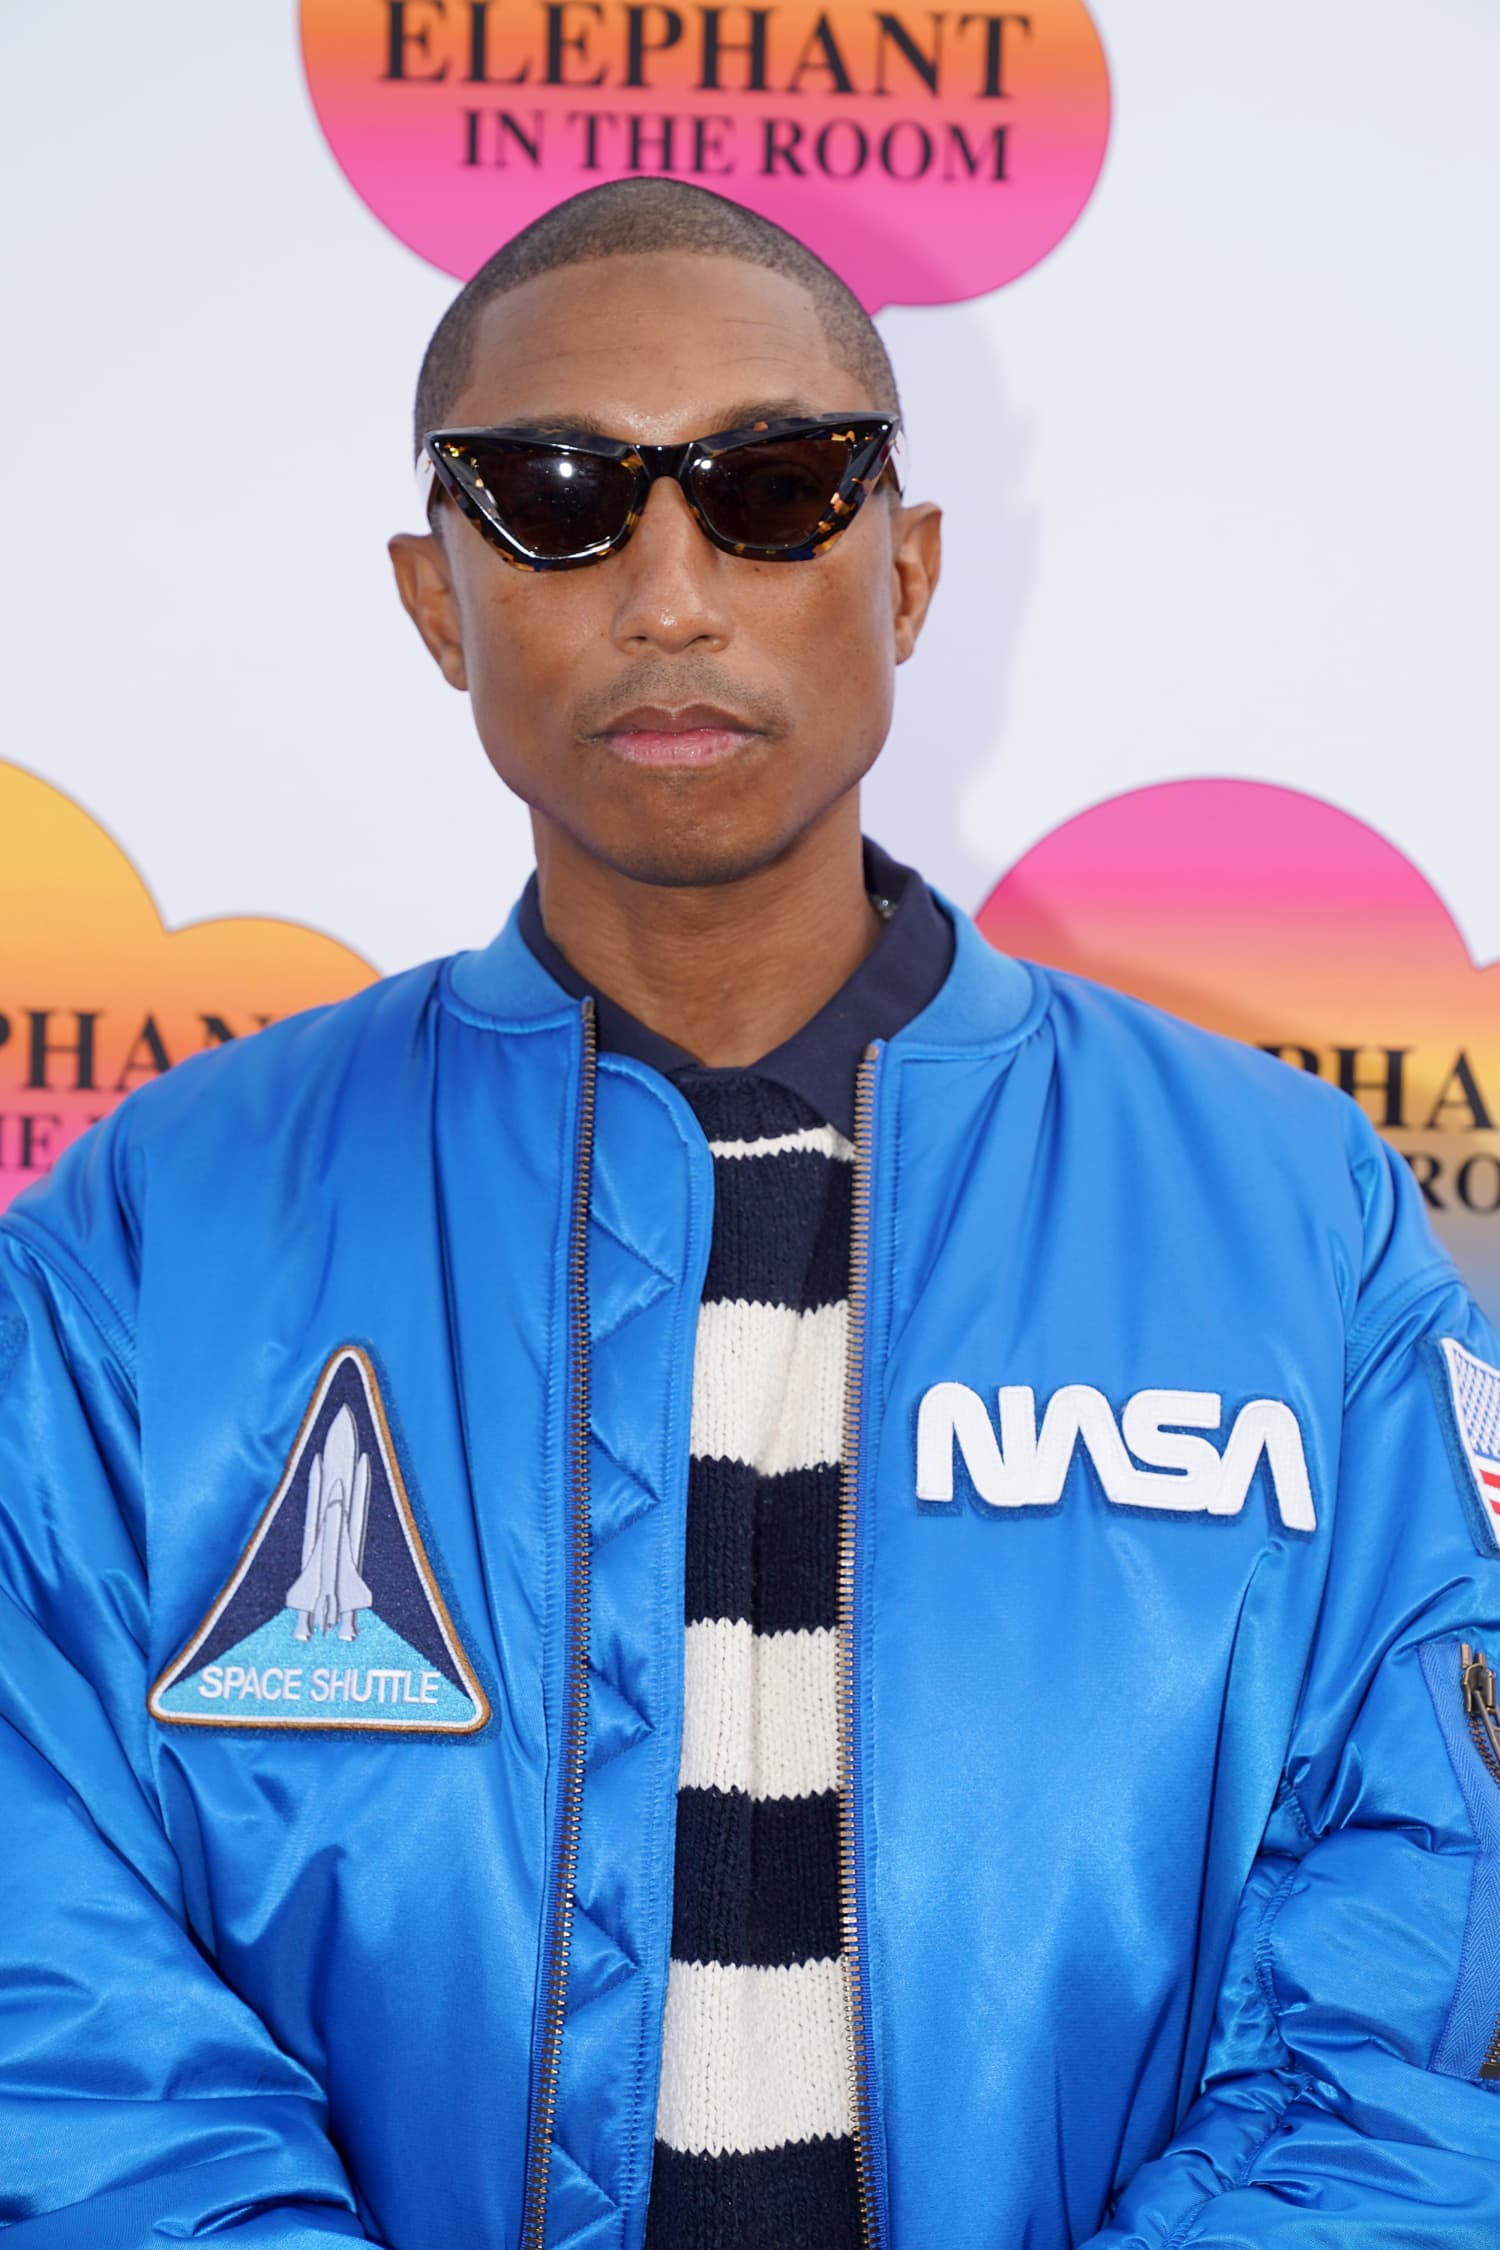 Pharrell Williams Just Shared the Recipe for One of His Miami Restaurant’s Popular Dishes